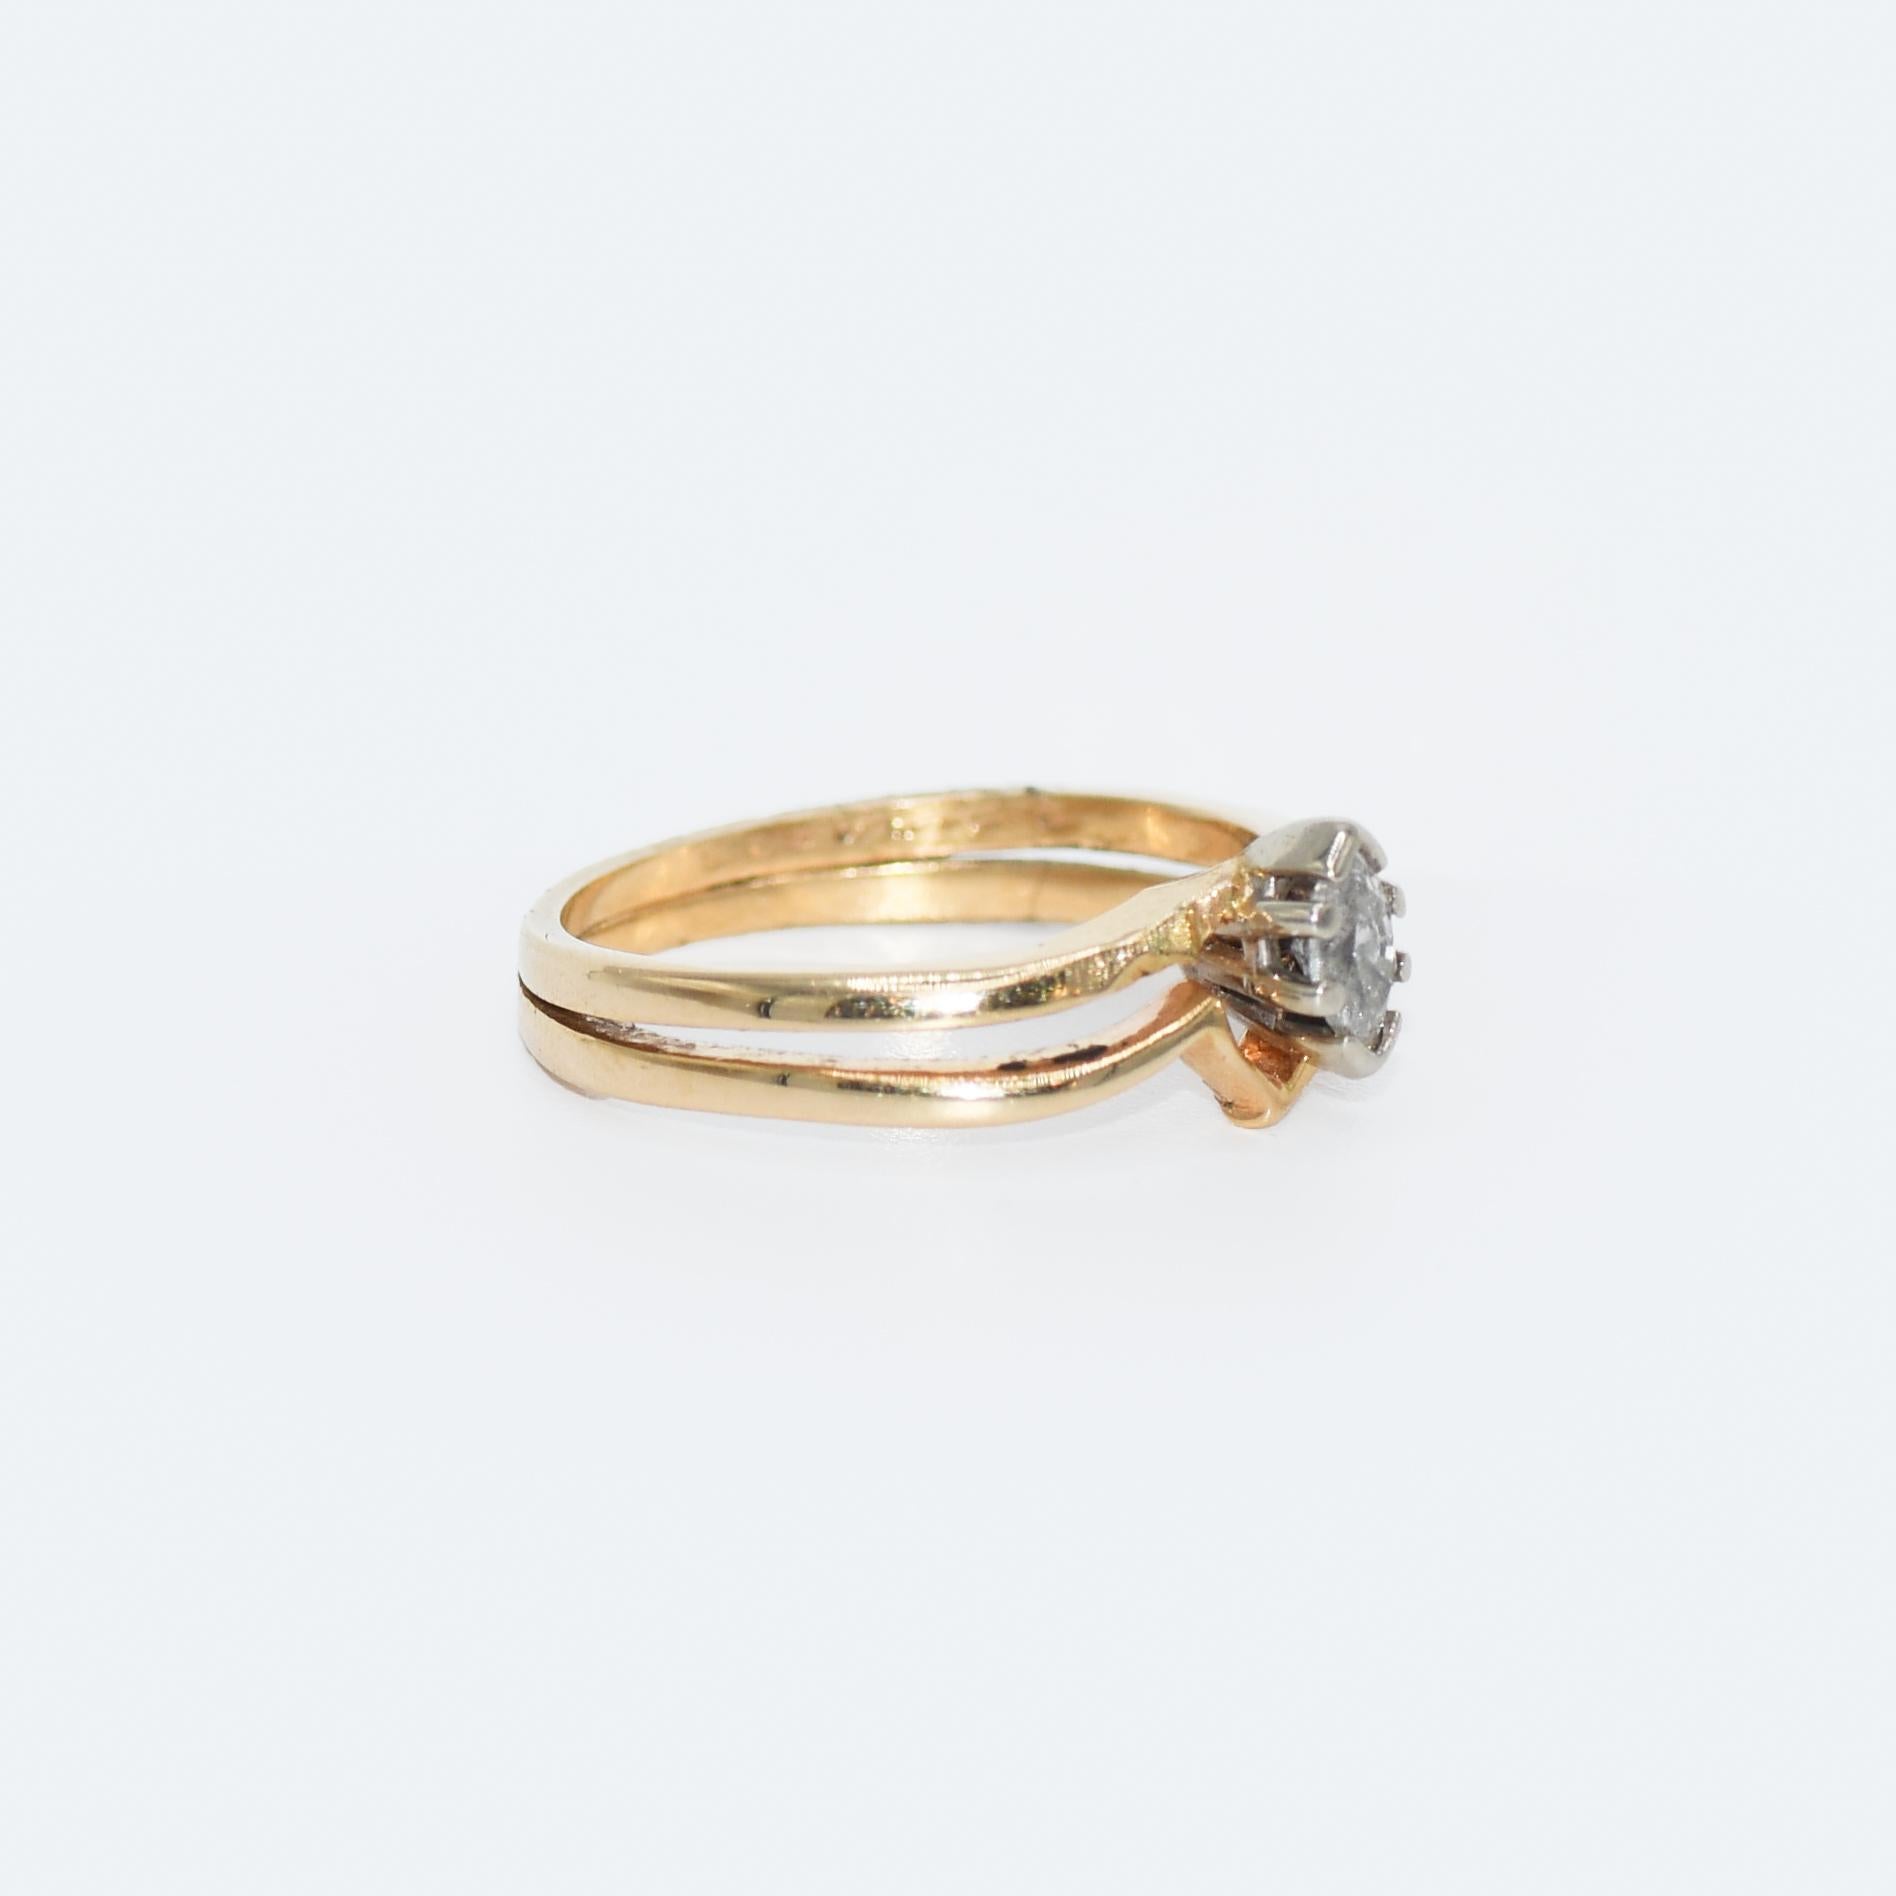 Marquise diamond solitaire ring in 14k yellow gold.
Stamped 14k and weighs 3.2 grams.
The marquise shaped diamond is H to i color, Si clarity, .20 carats.
The ring size is 6 3/4 and can be sized.
Very good condition.